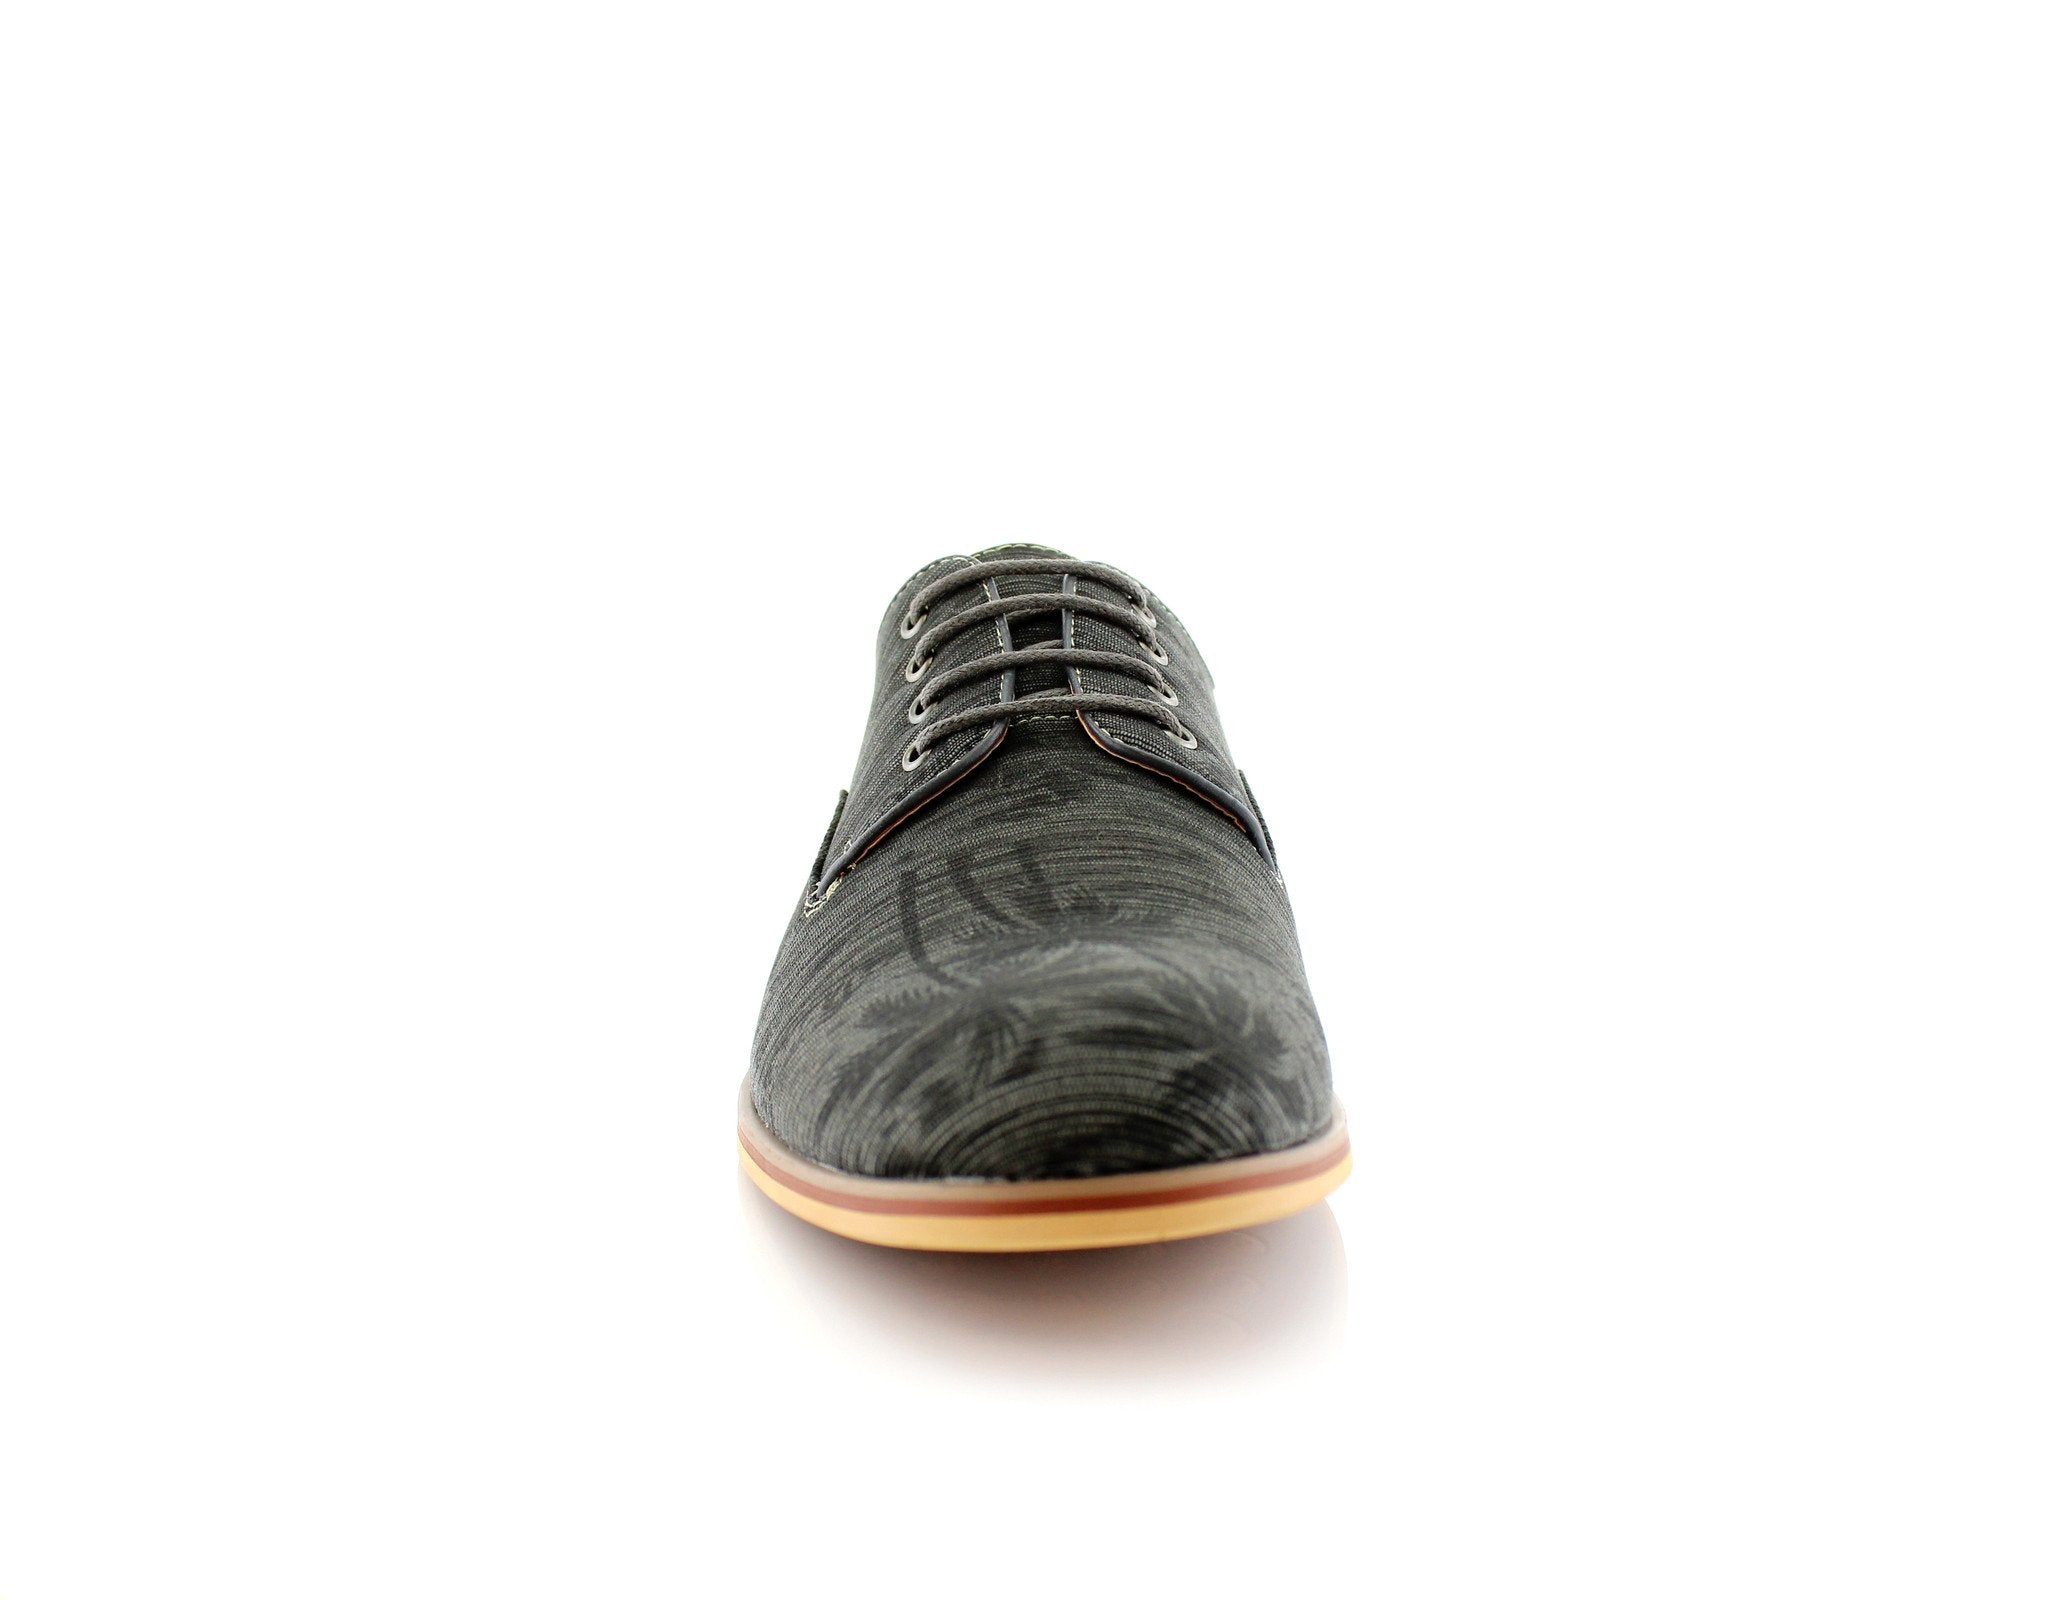 Palm Tree Print Derby Shoes | Paco by Ferro Aldo | Conal Footwear | Front Angle View